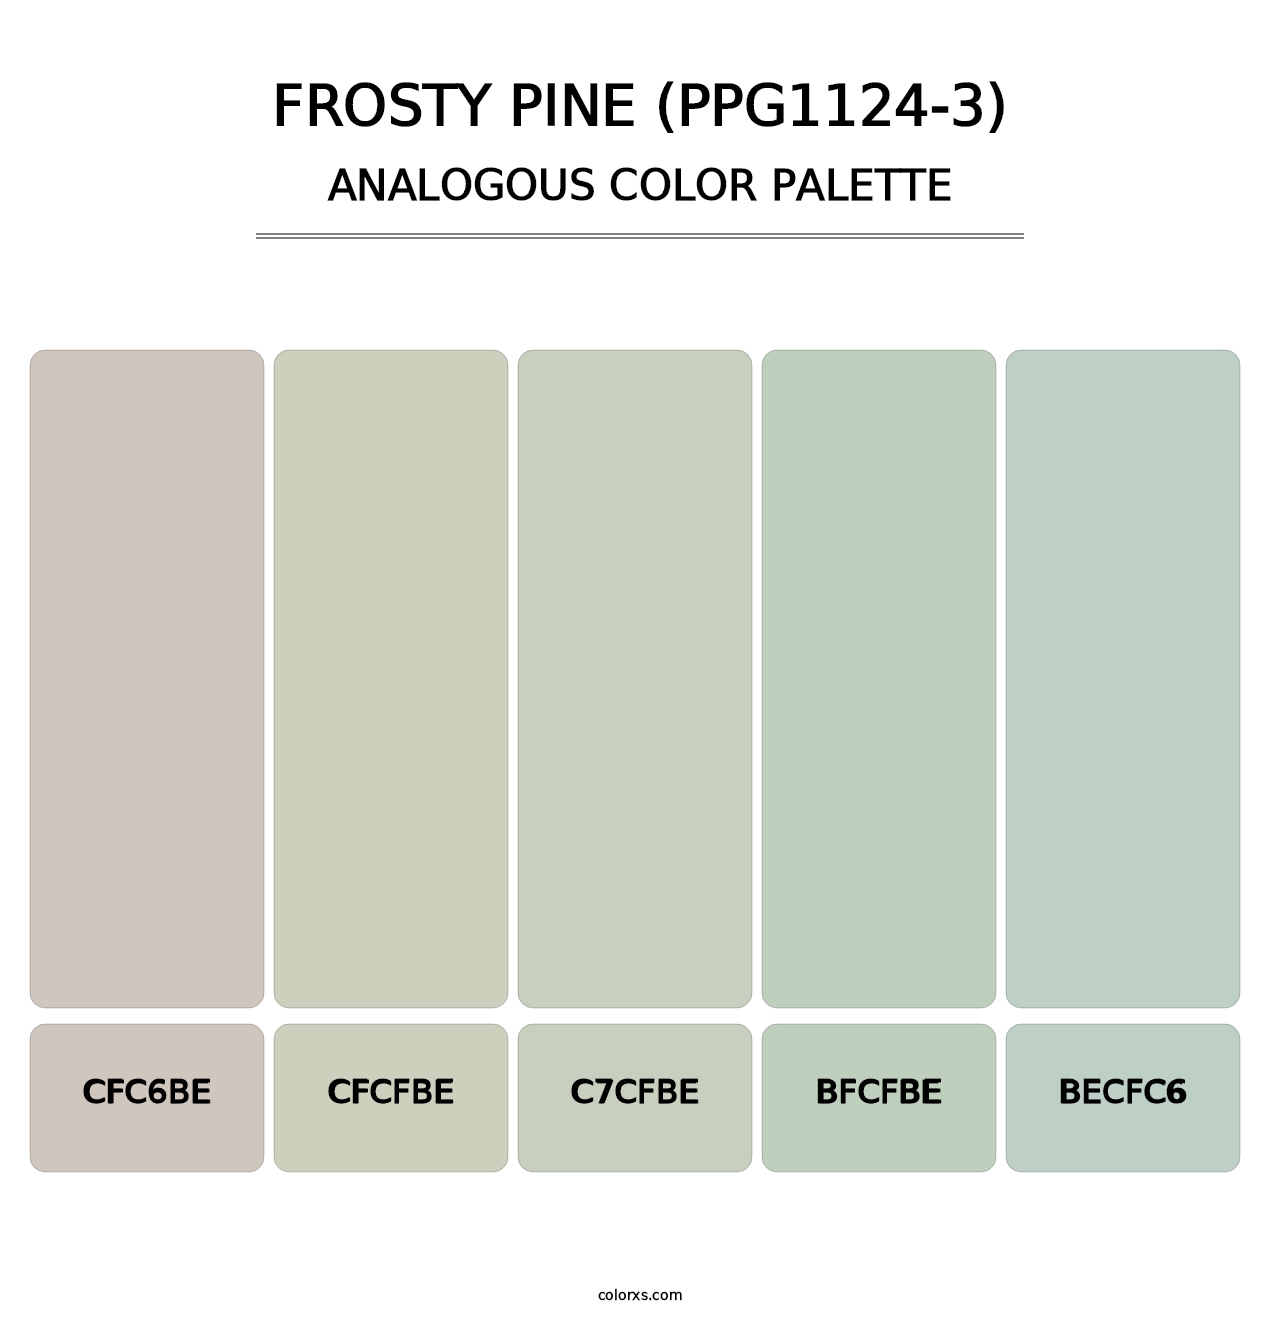 Frosty Pine (PPG1124-3) - Analogous Color Palette